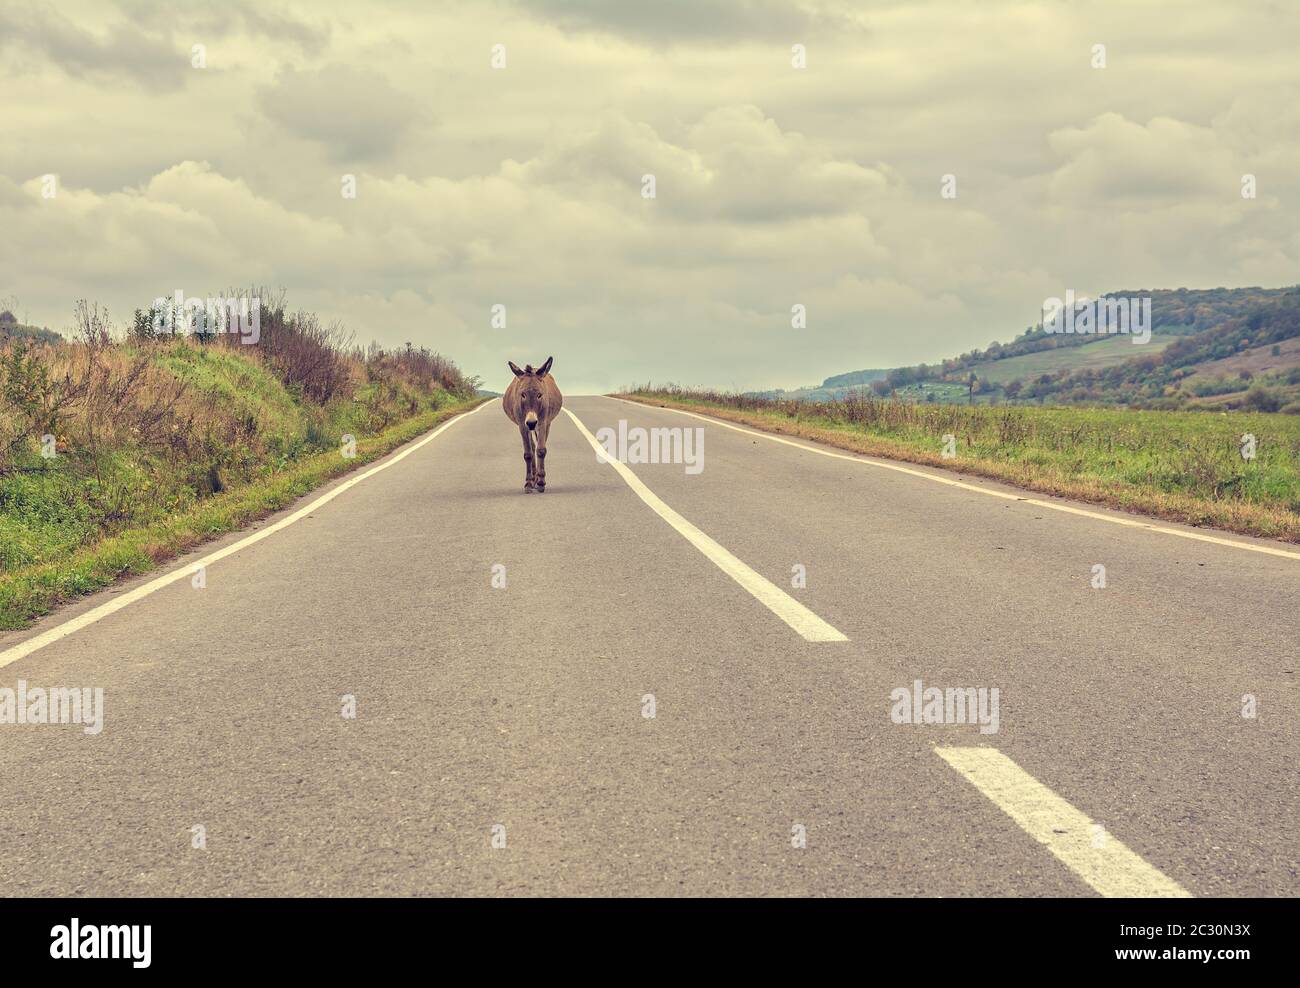 Vintage look of a lonely donkey walking on the highway on a cloudy autumn day. Concept for being lost, confused or loneliness Stock Photo